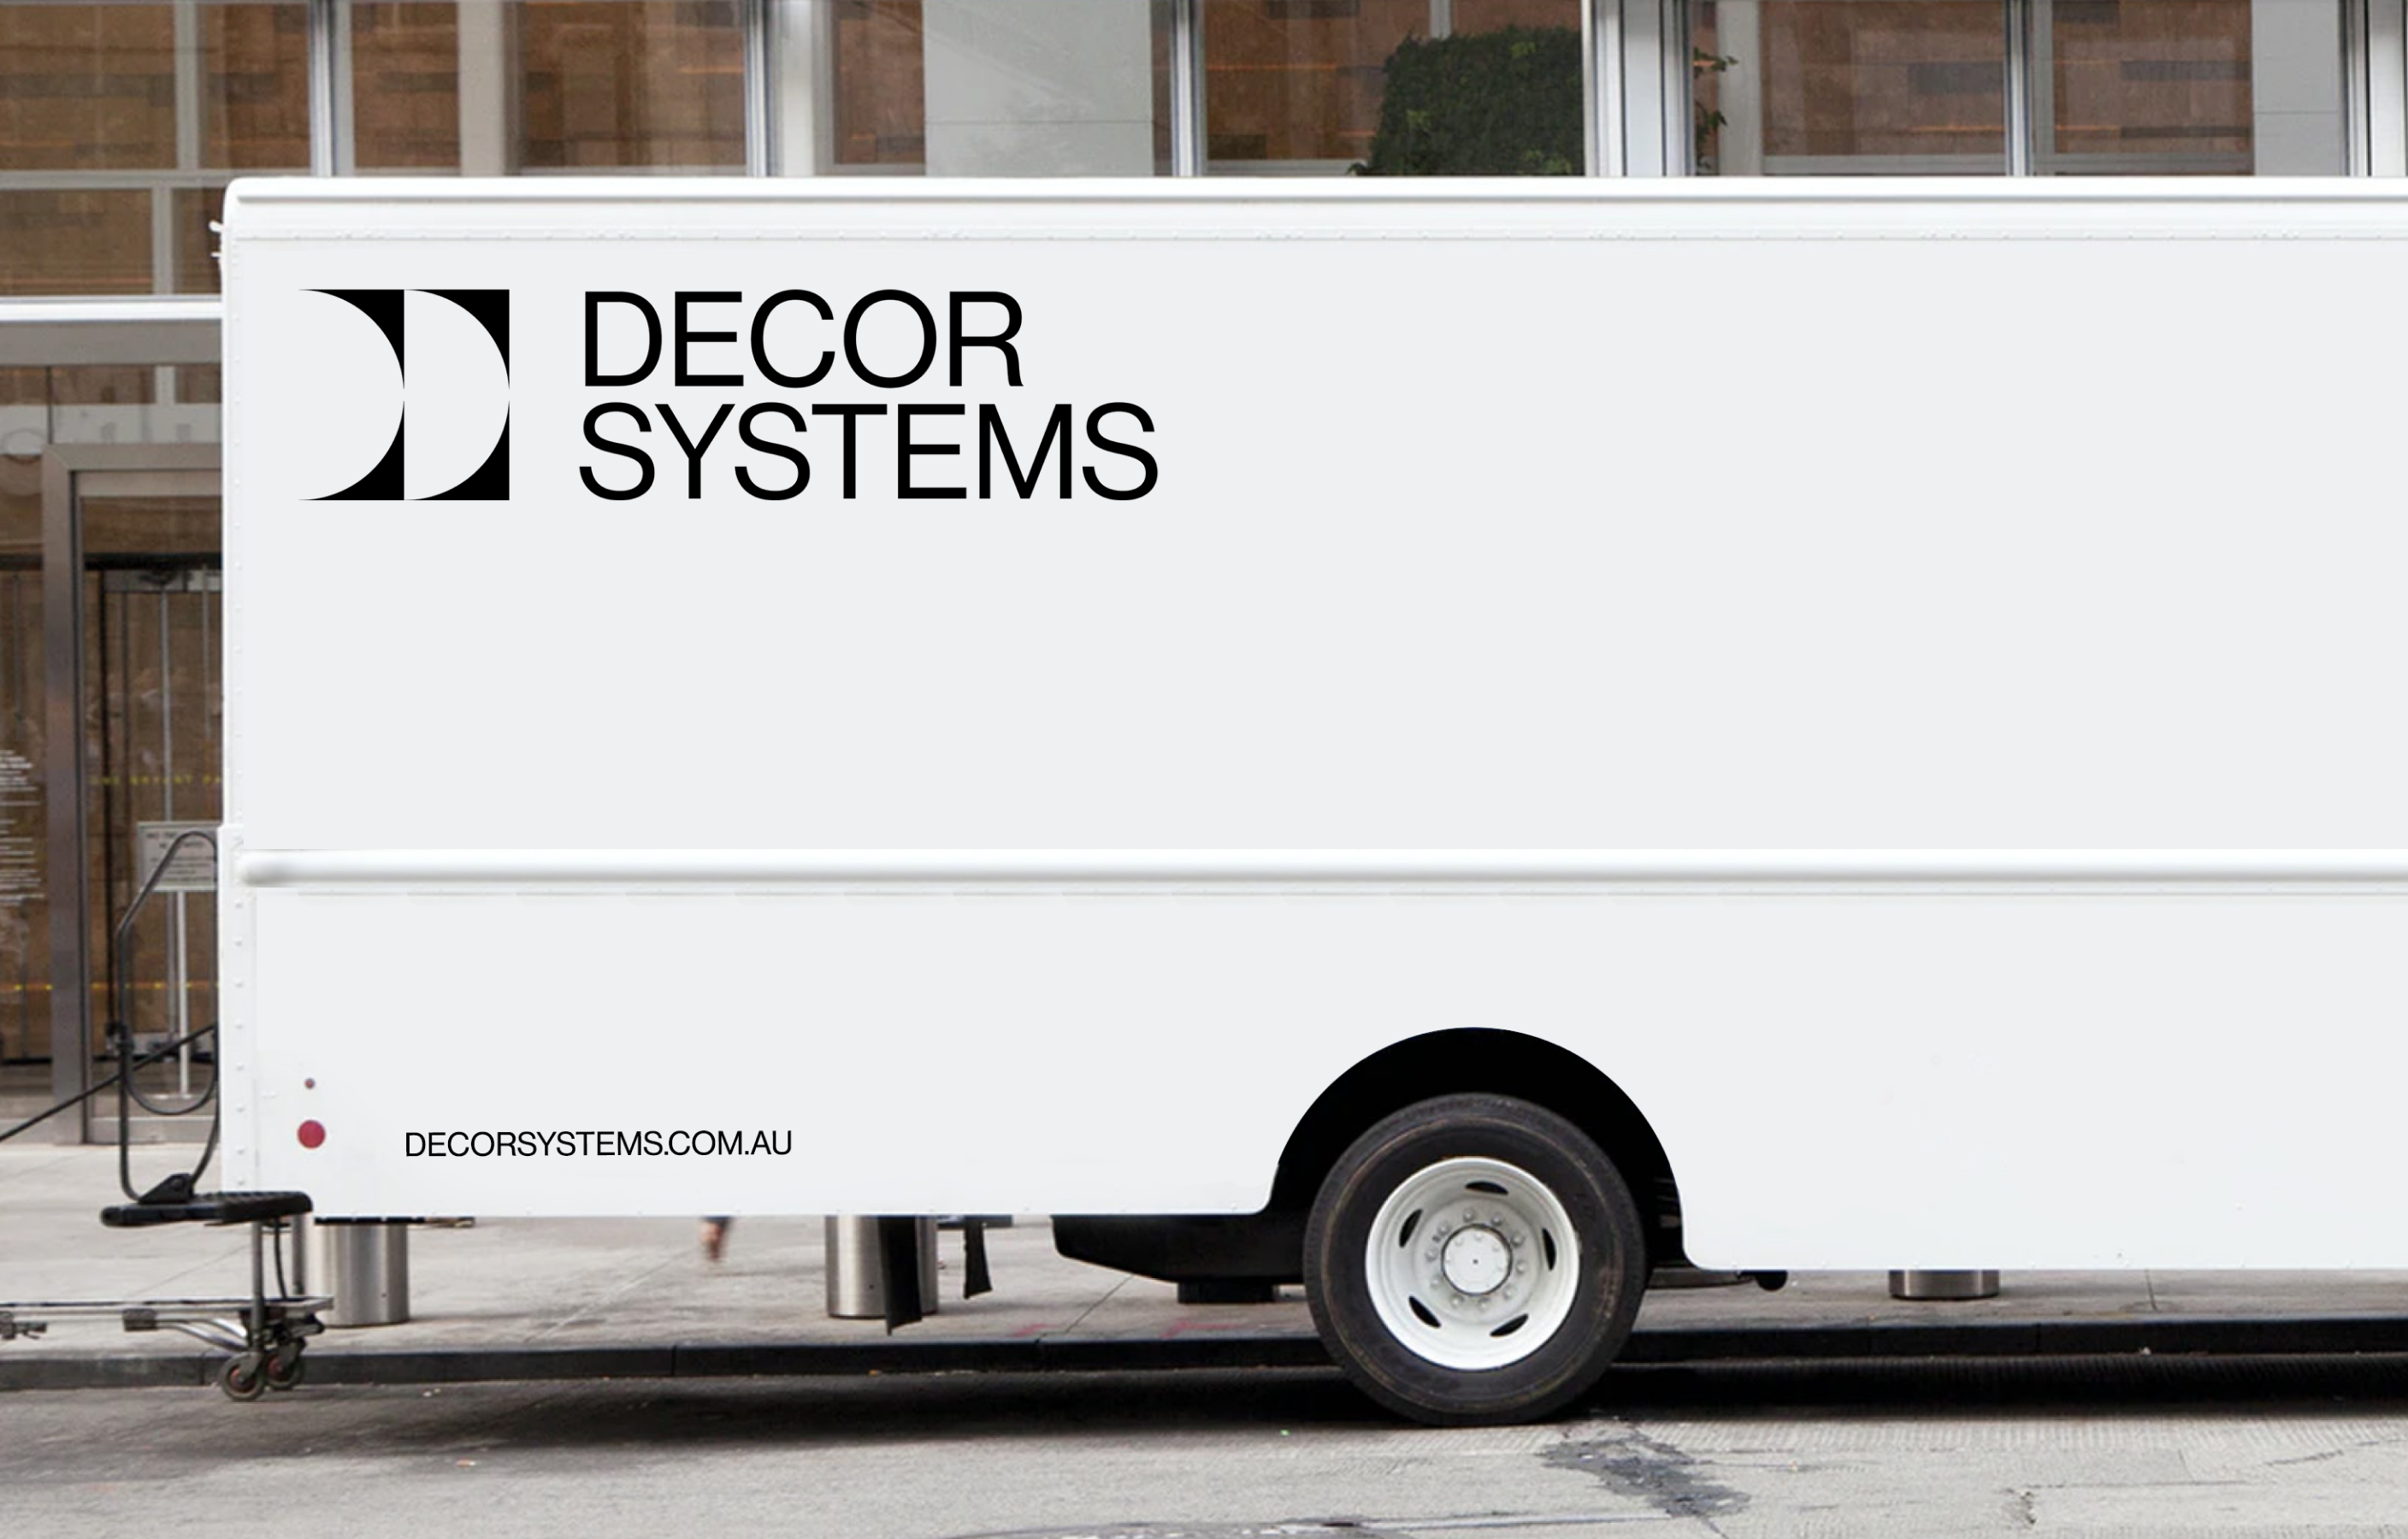 Decor Systems new branding printed on the side of a truck